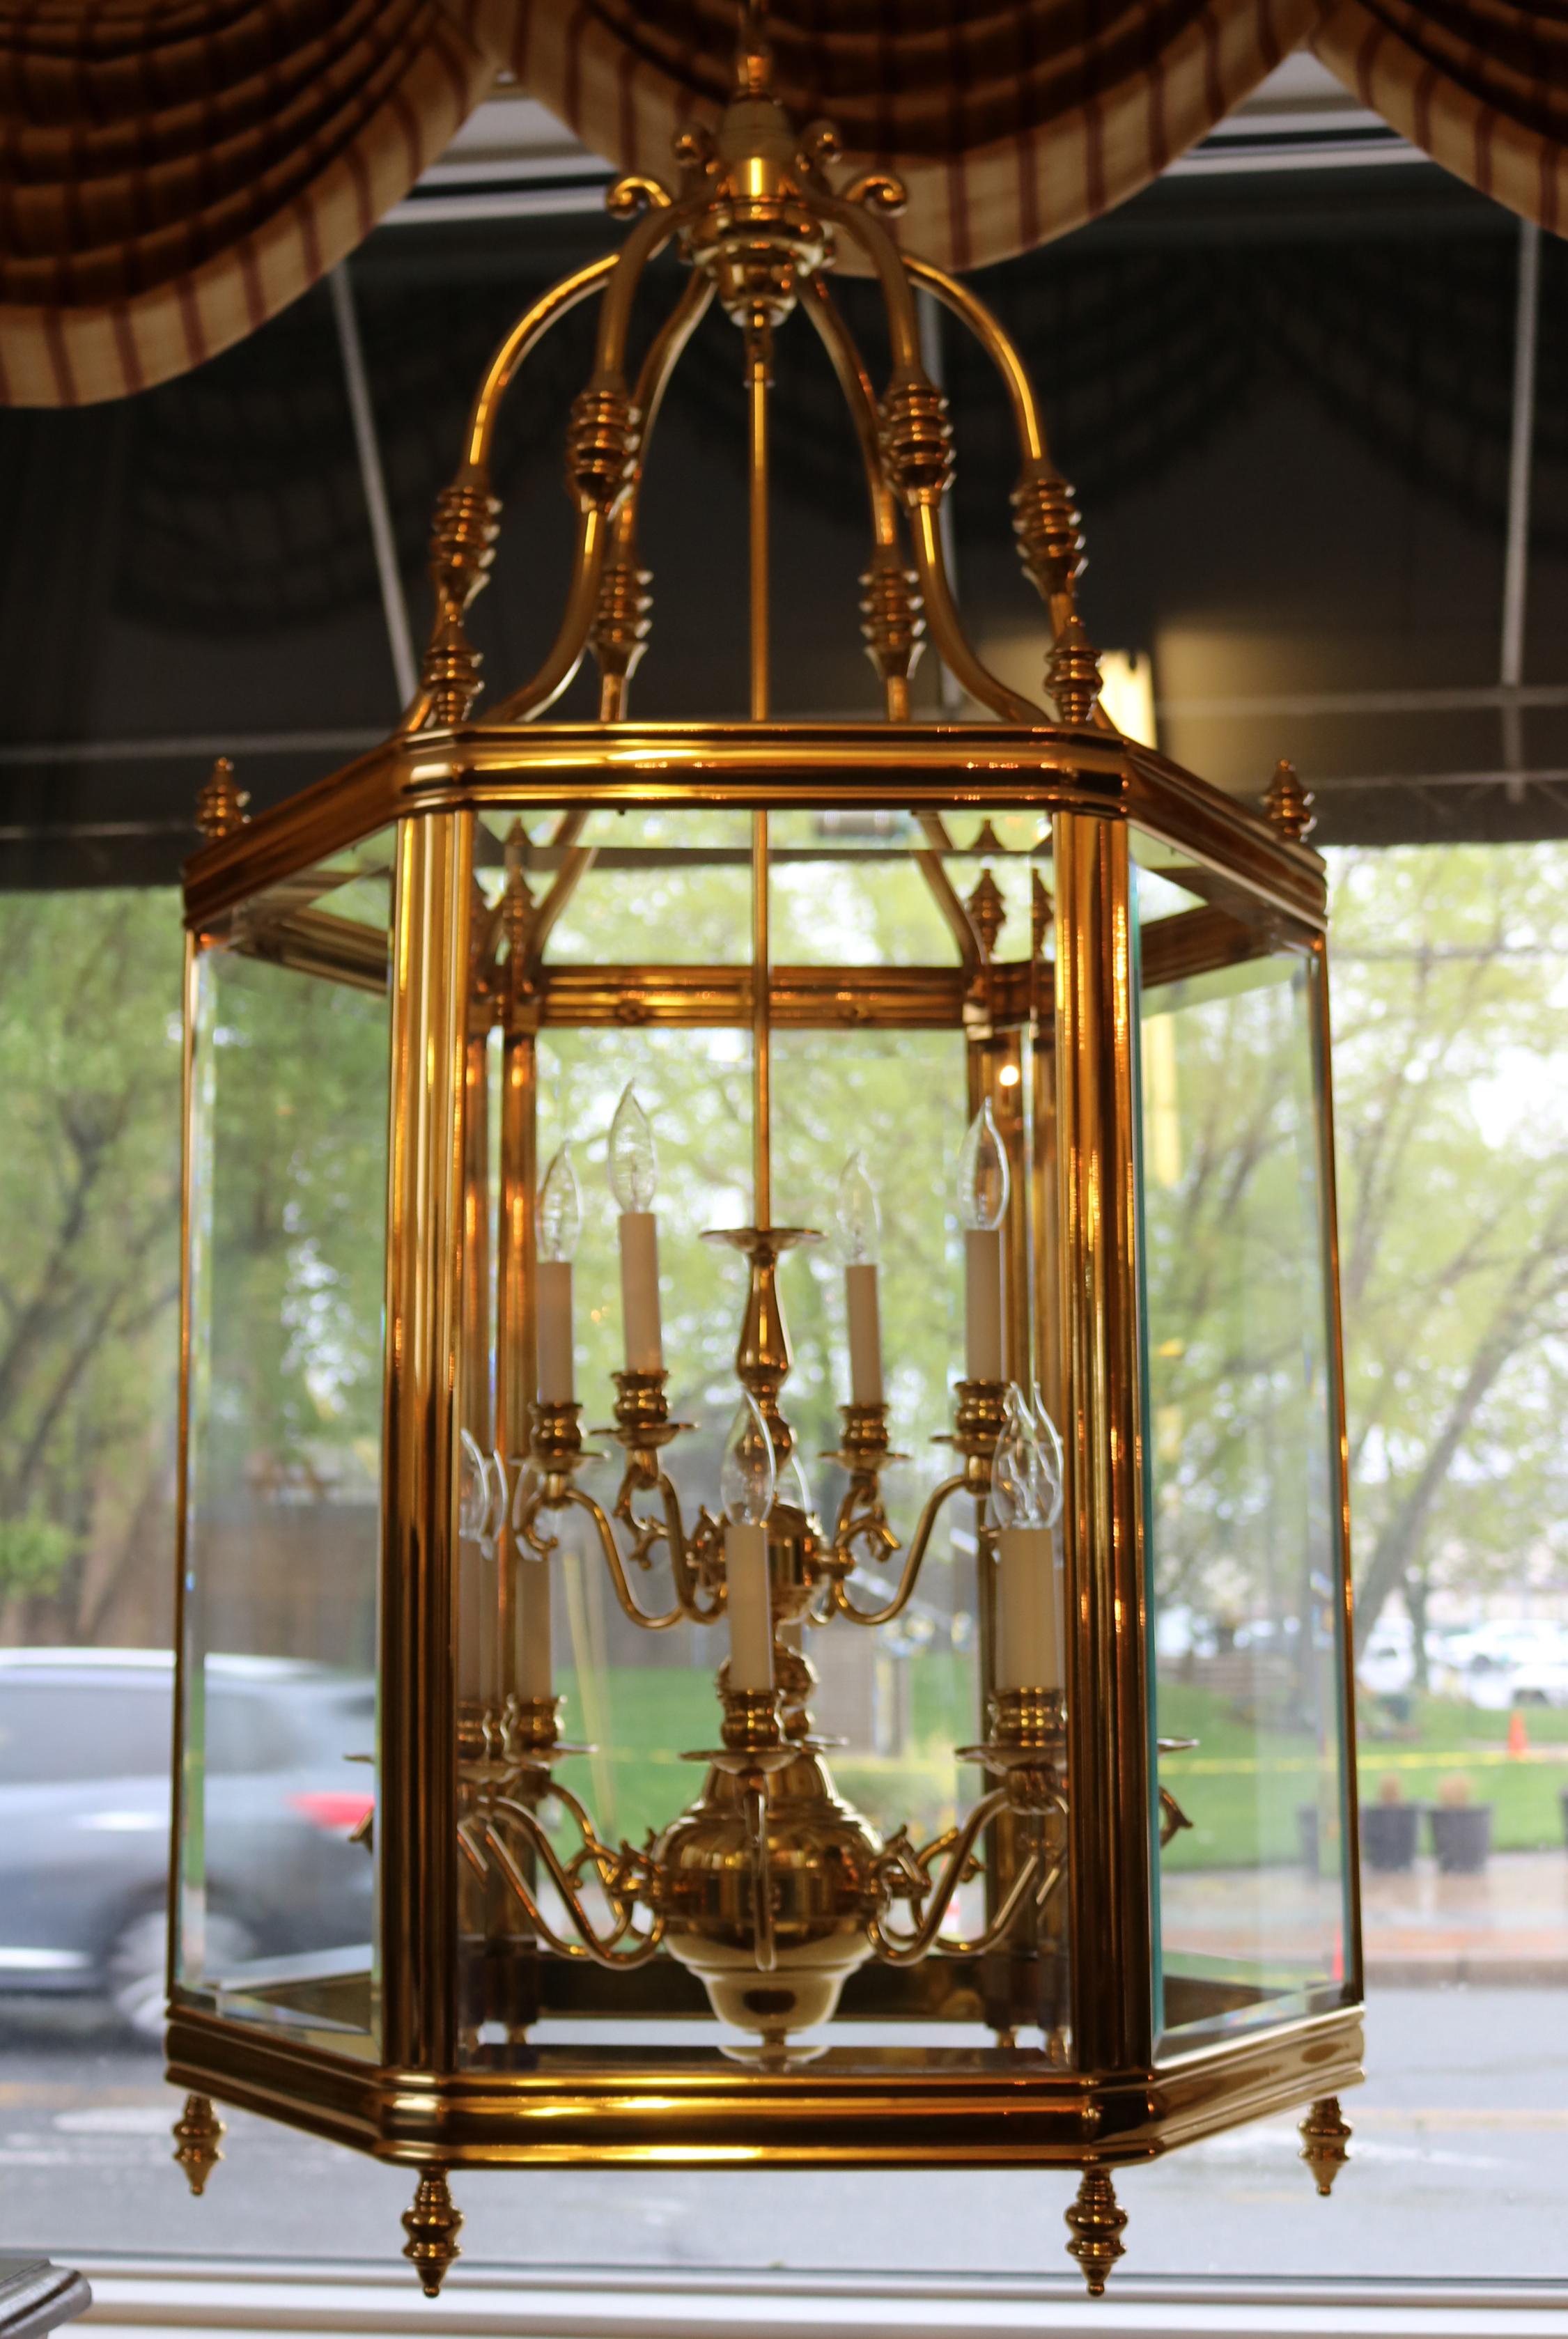 Monumental Over 4 FT Tall 12 Light Brass & Glass Chandelier Lantern In Good Condition For Sale In Long Branch, NJ